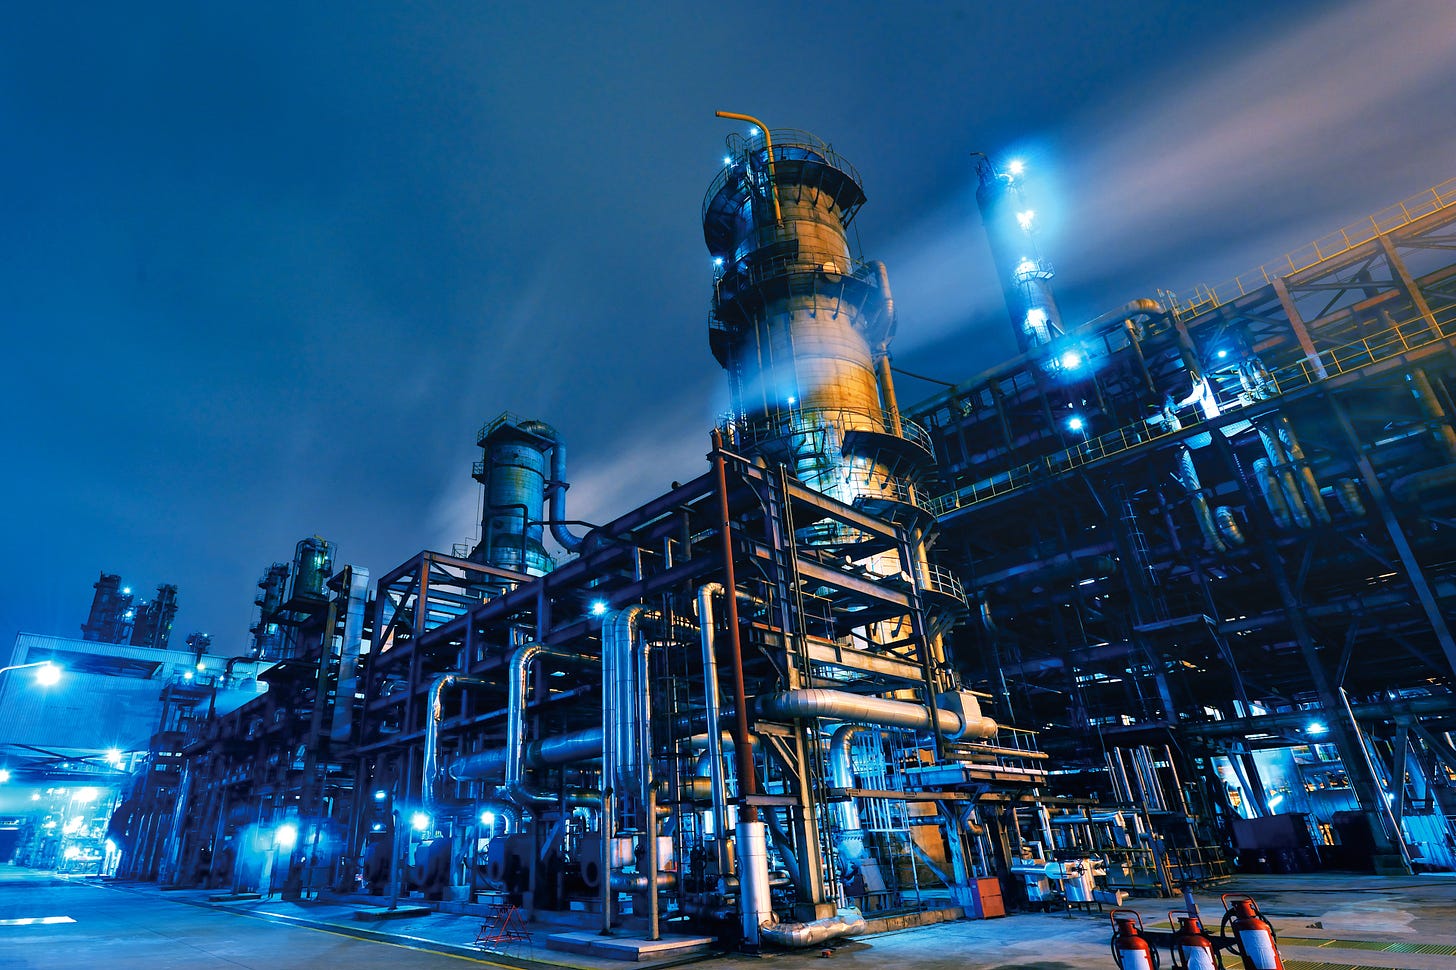 Creating Safer, More Eco-Friendly Petrochemical Plants - Texas A&M Today